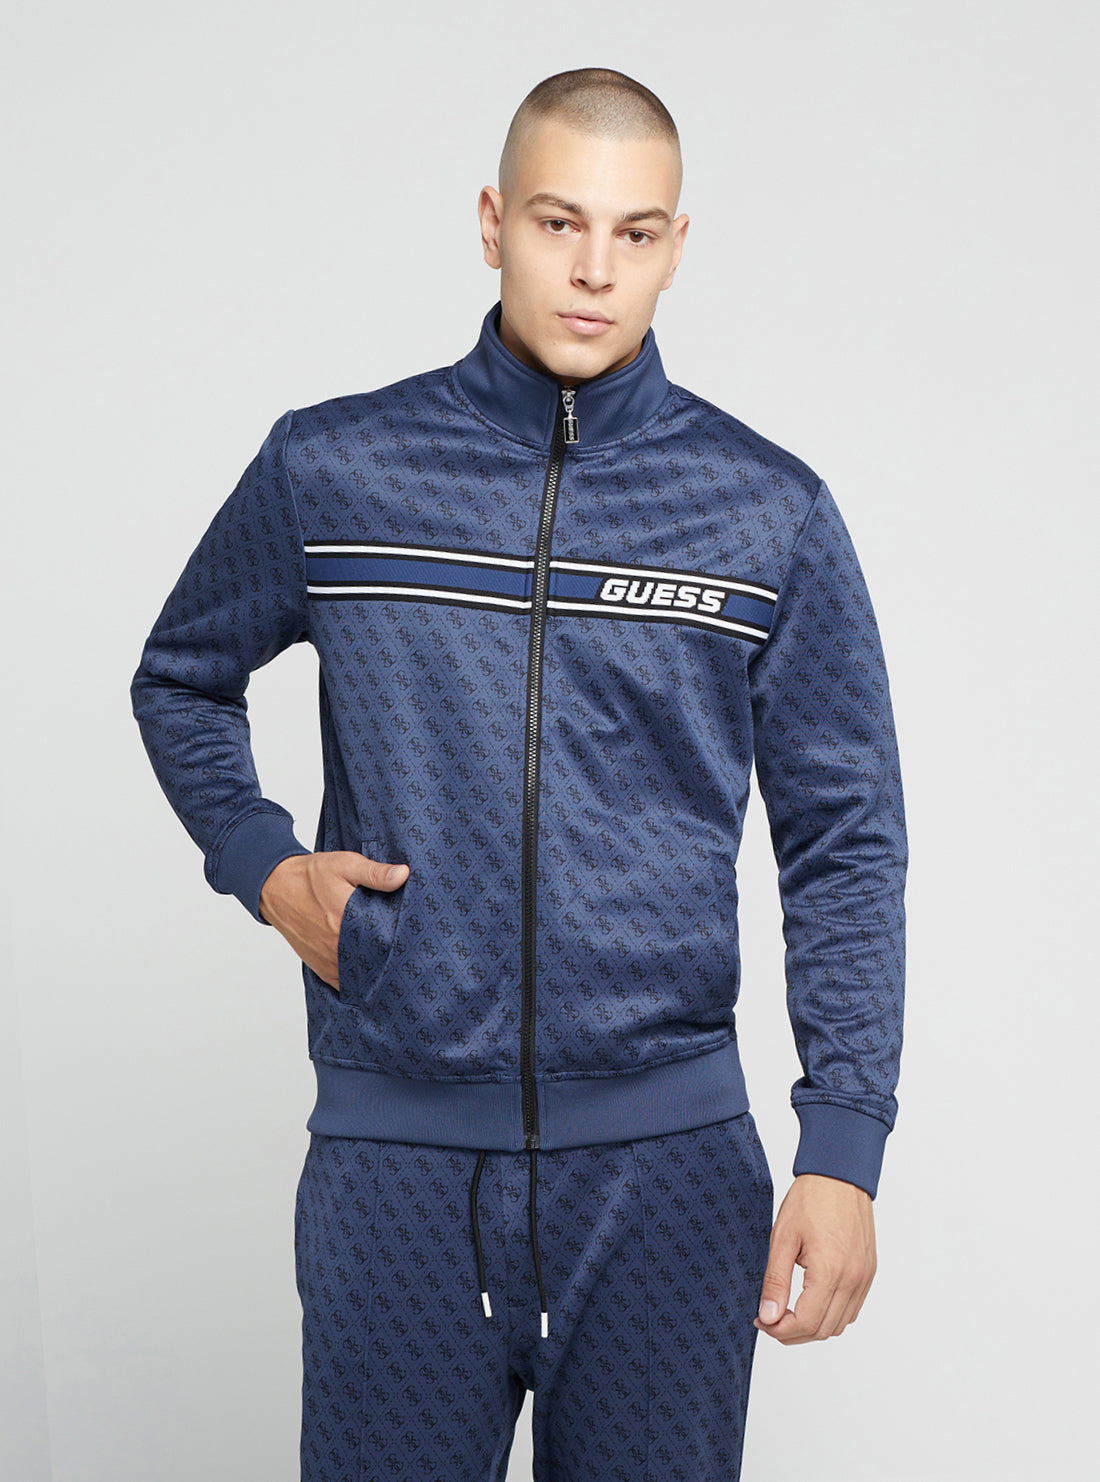 Men's Activewear | Sportswear & Gym Clothes For Men | GUESS